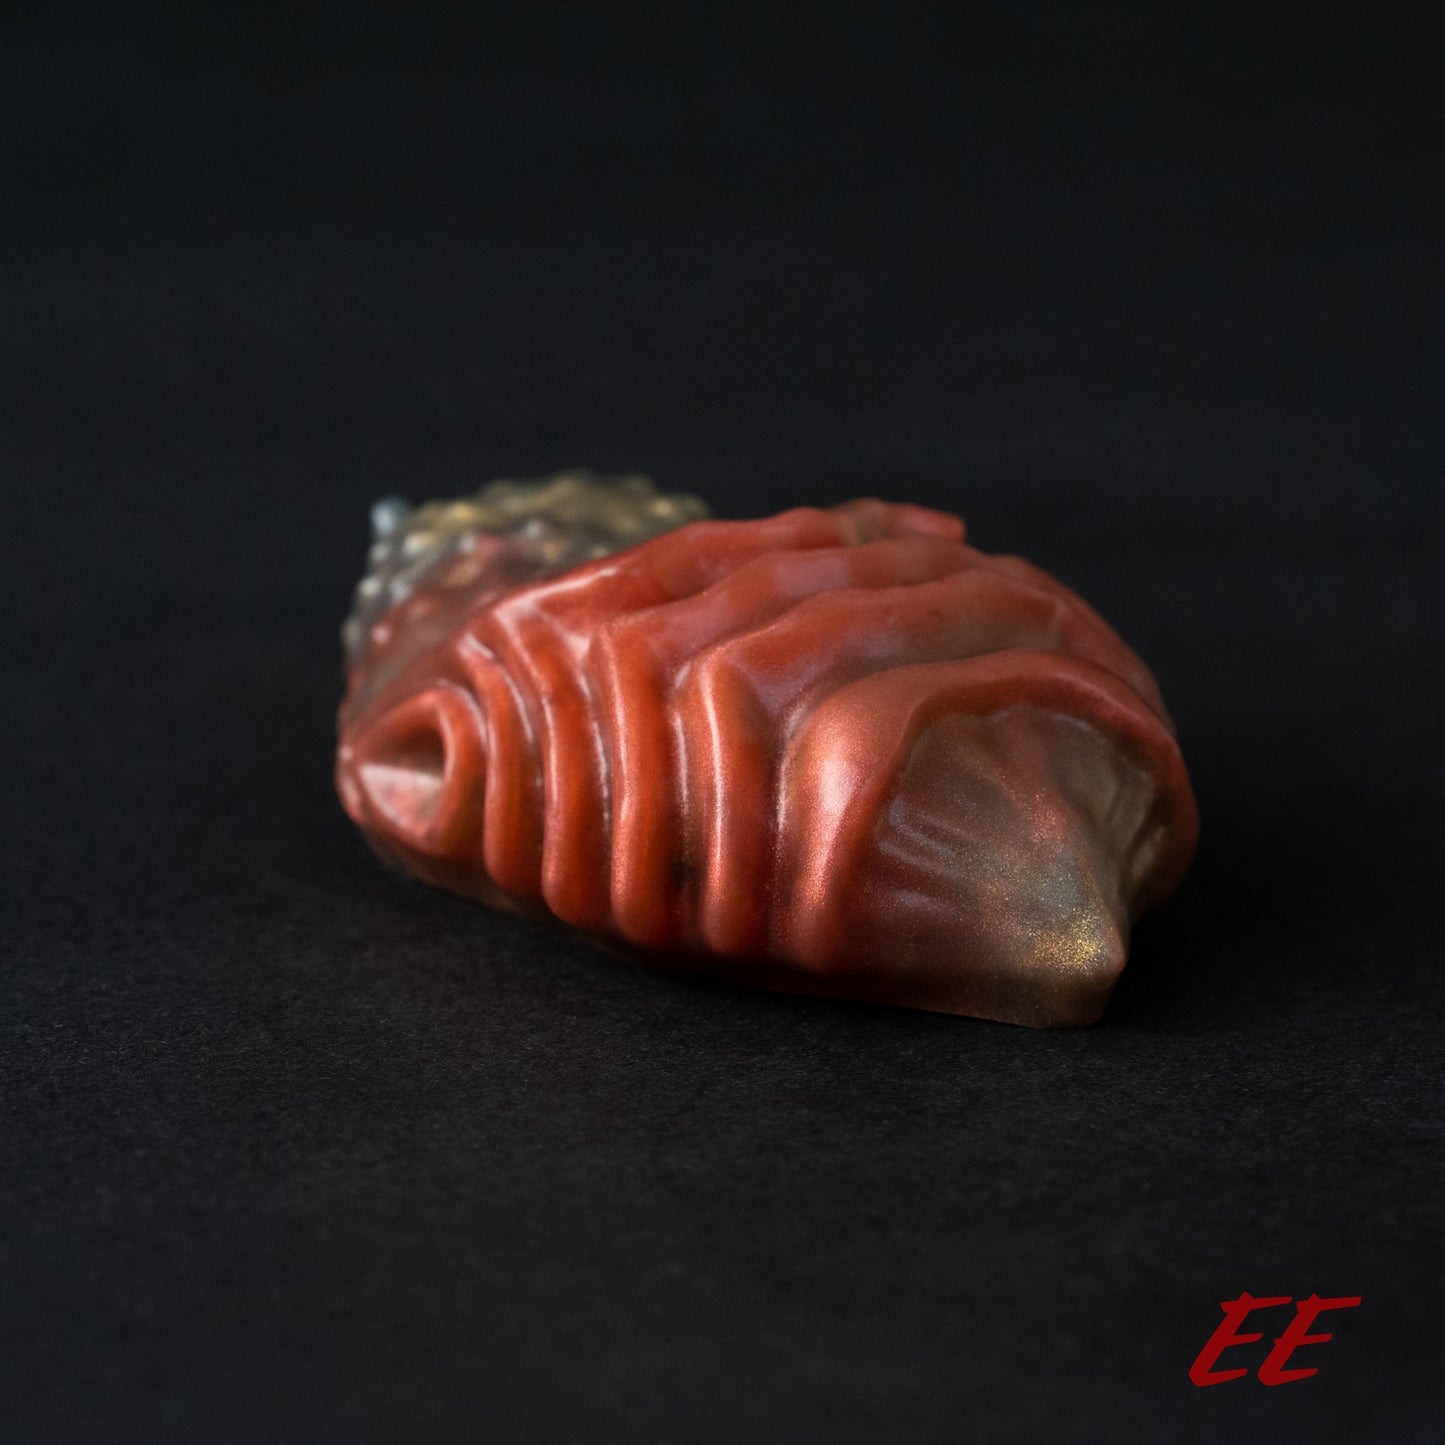 Edgar Silicone Grindable/Squishy - Soft Firmness - Shimmery Red/Black/Gold